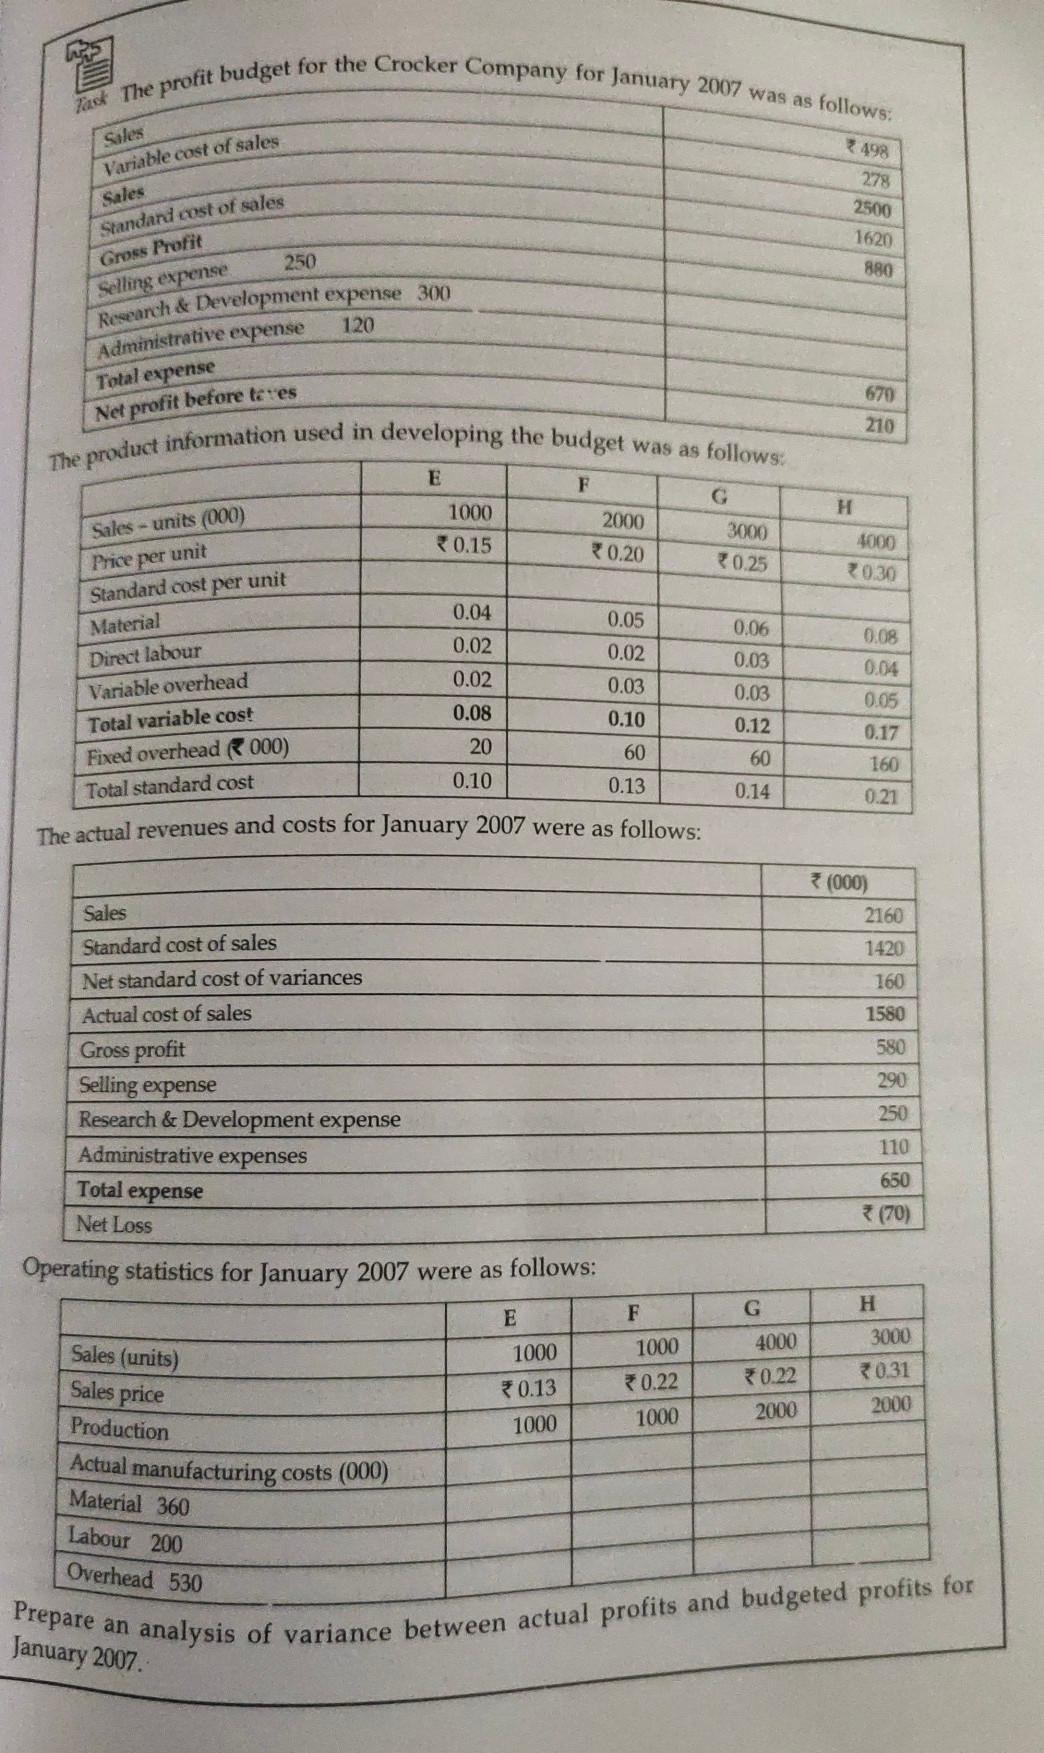 Task The profit budget for the Crocker Company for January 2007 was as follows. Sales Variable cost of sales